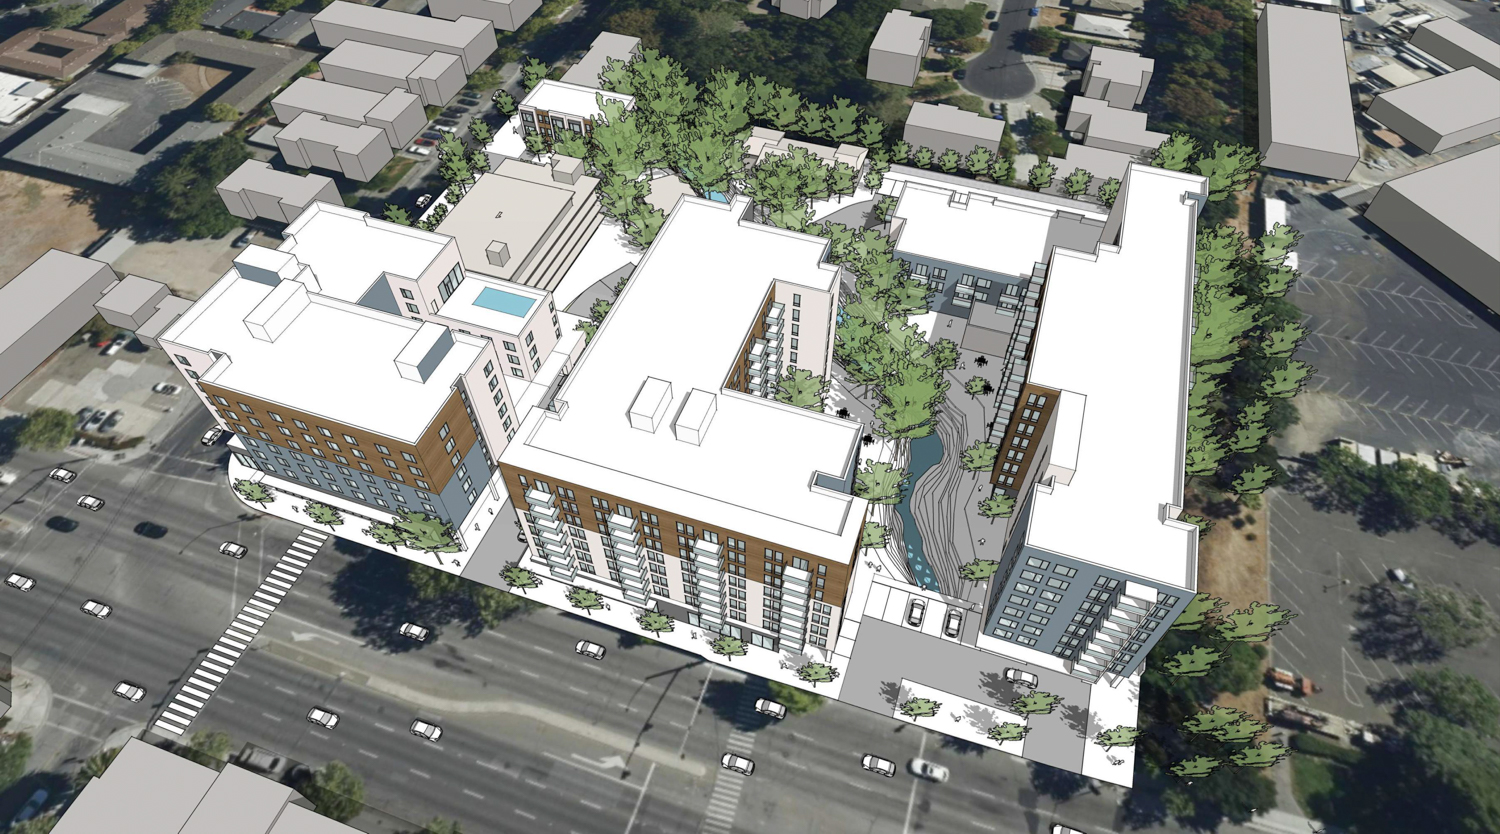 3400 El Camino Real aerial view, rendering by Lowney Architecture